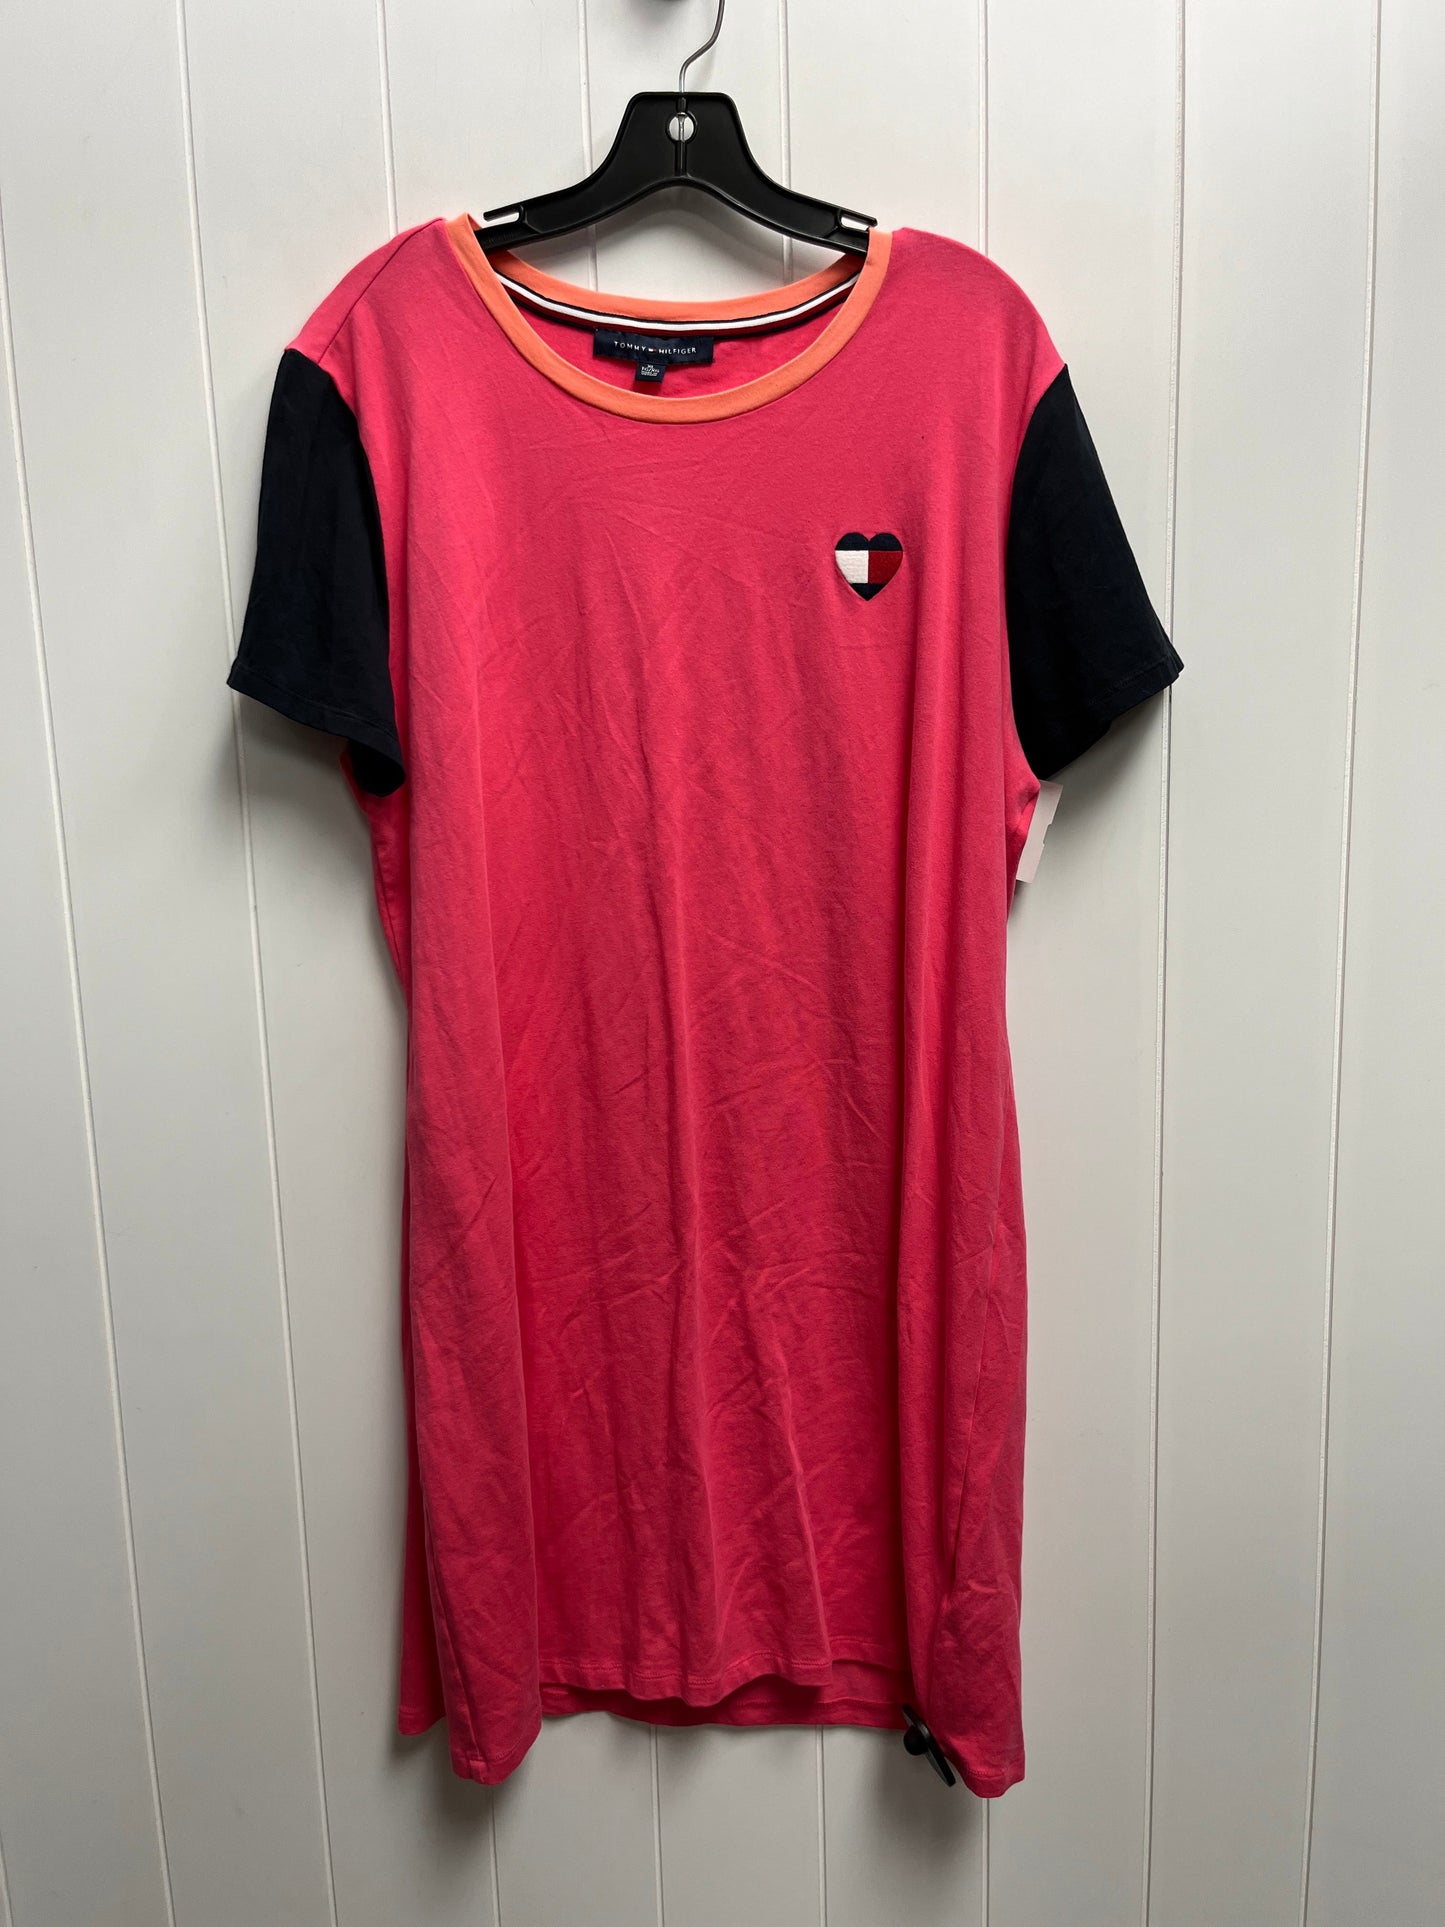 Dress Casual Short By Tommy Hilfiger  Size: Xl